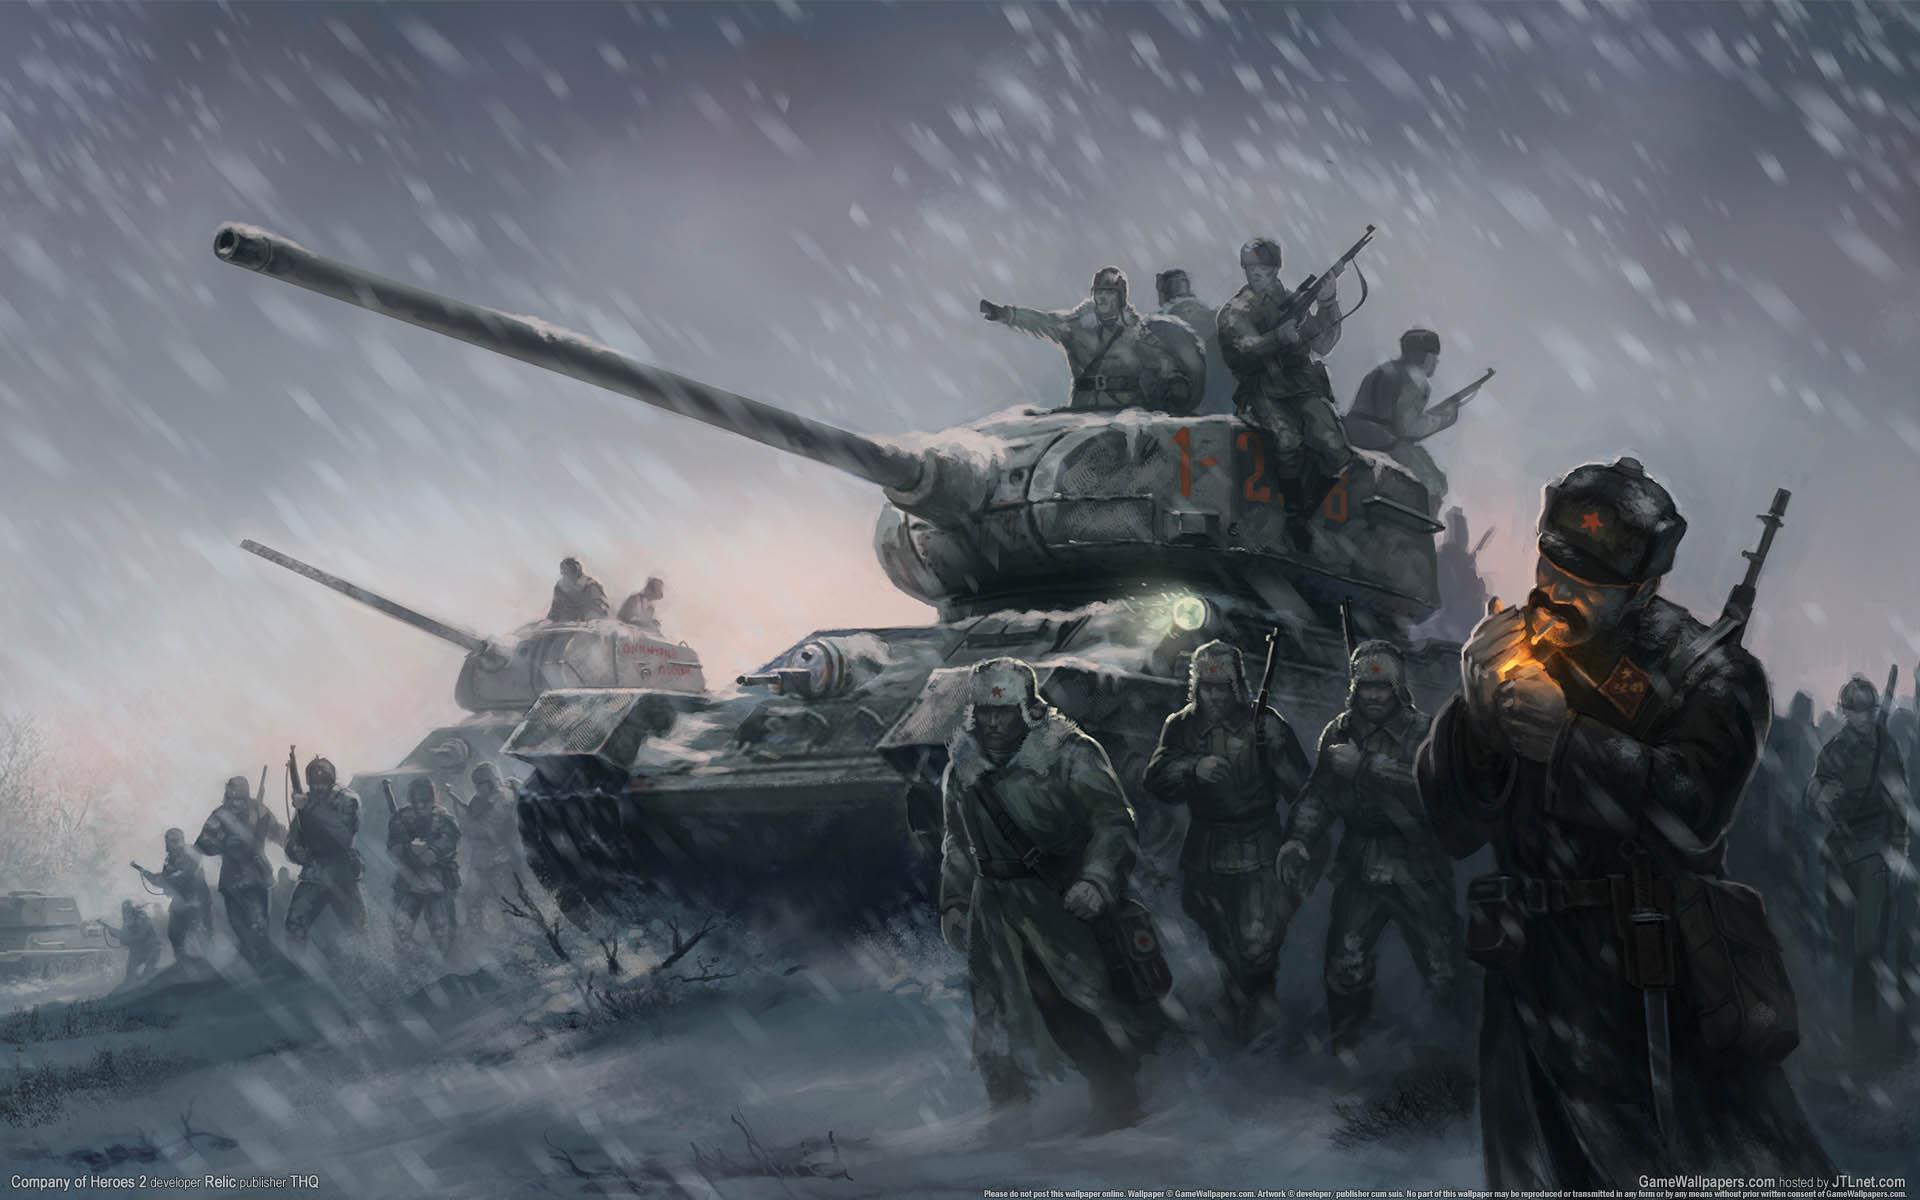 Company of Heroes 2 achtergrond 01 1920x1200